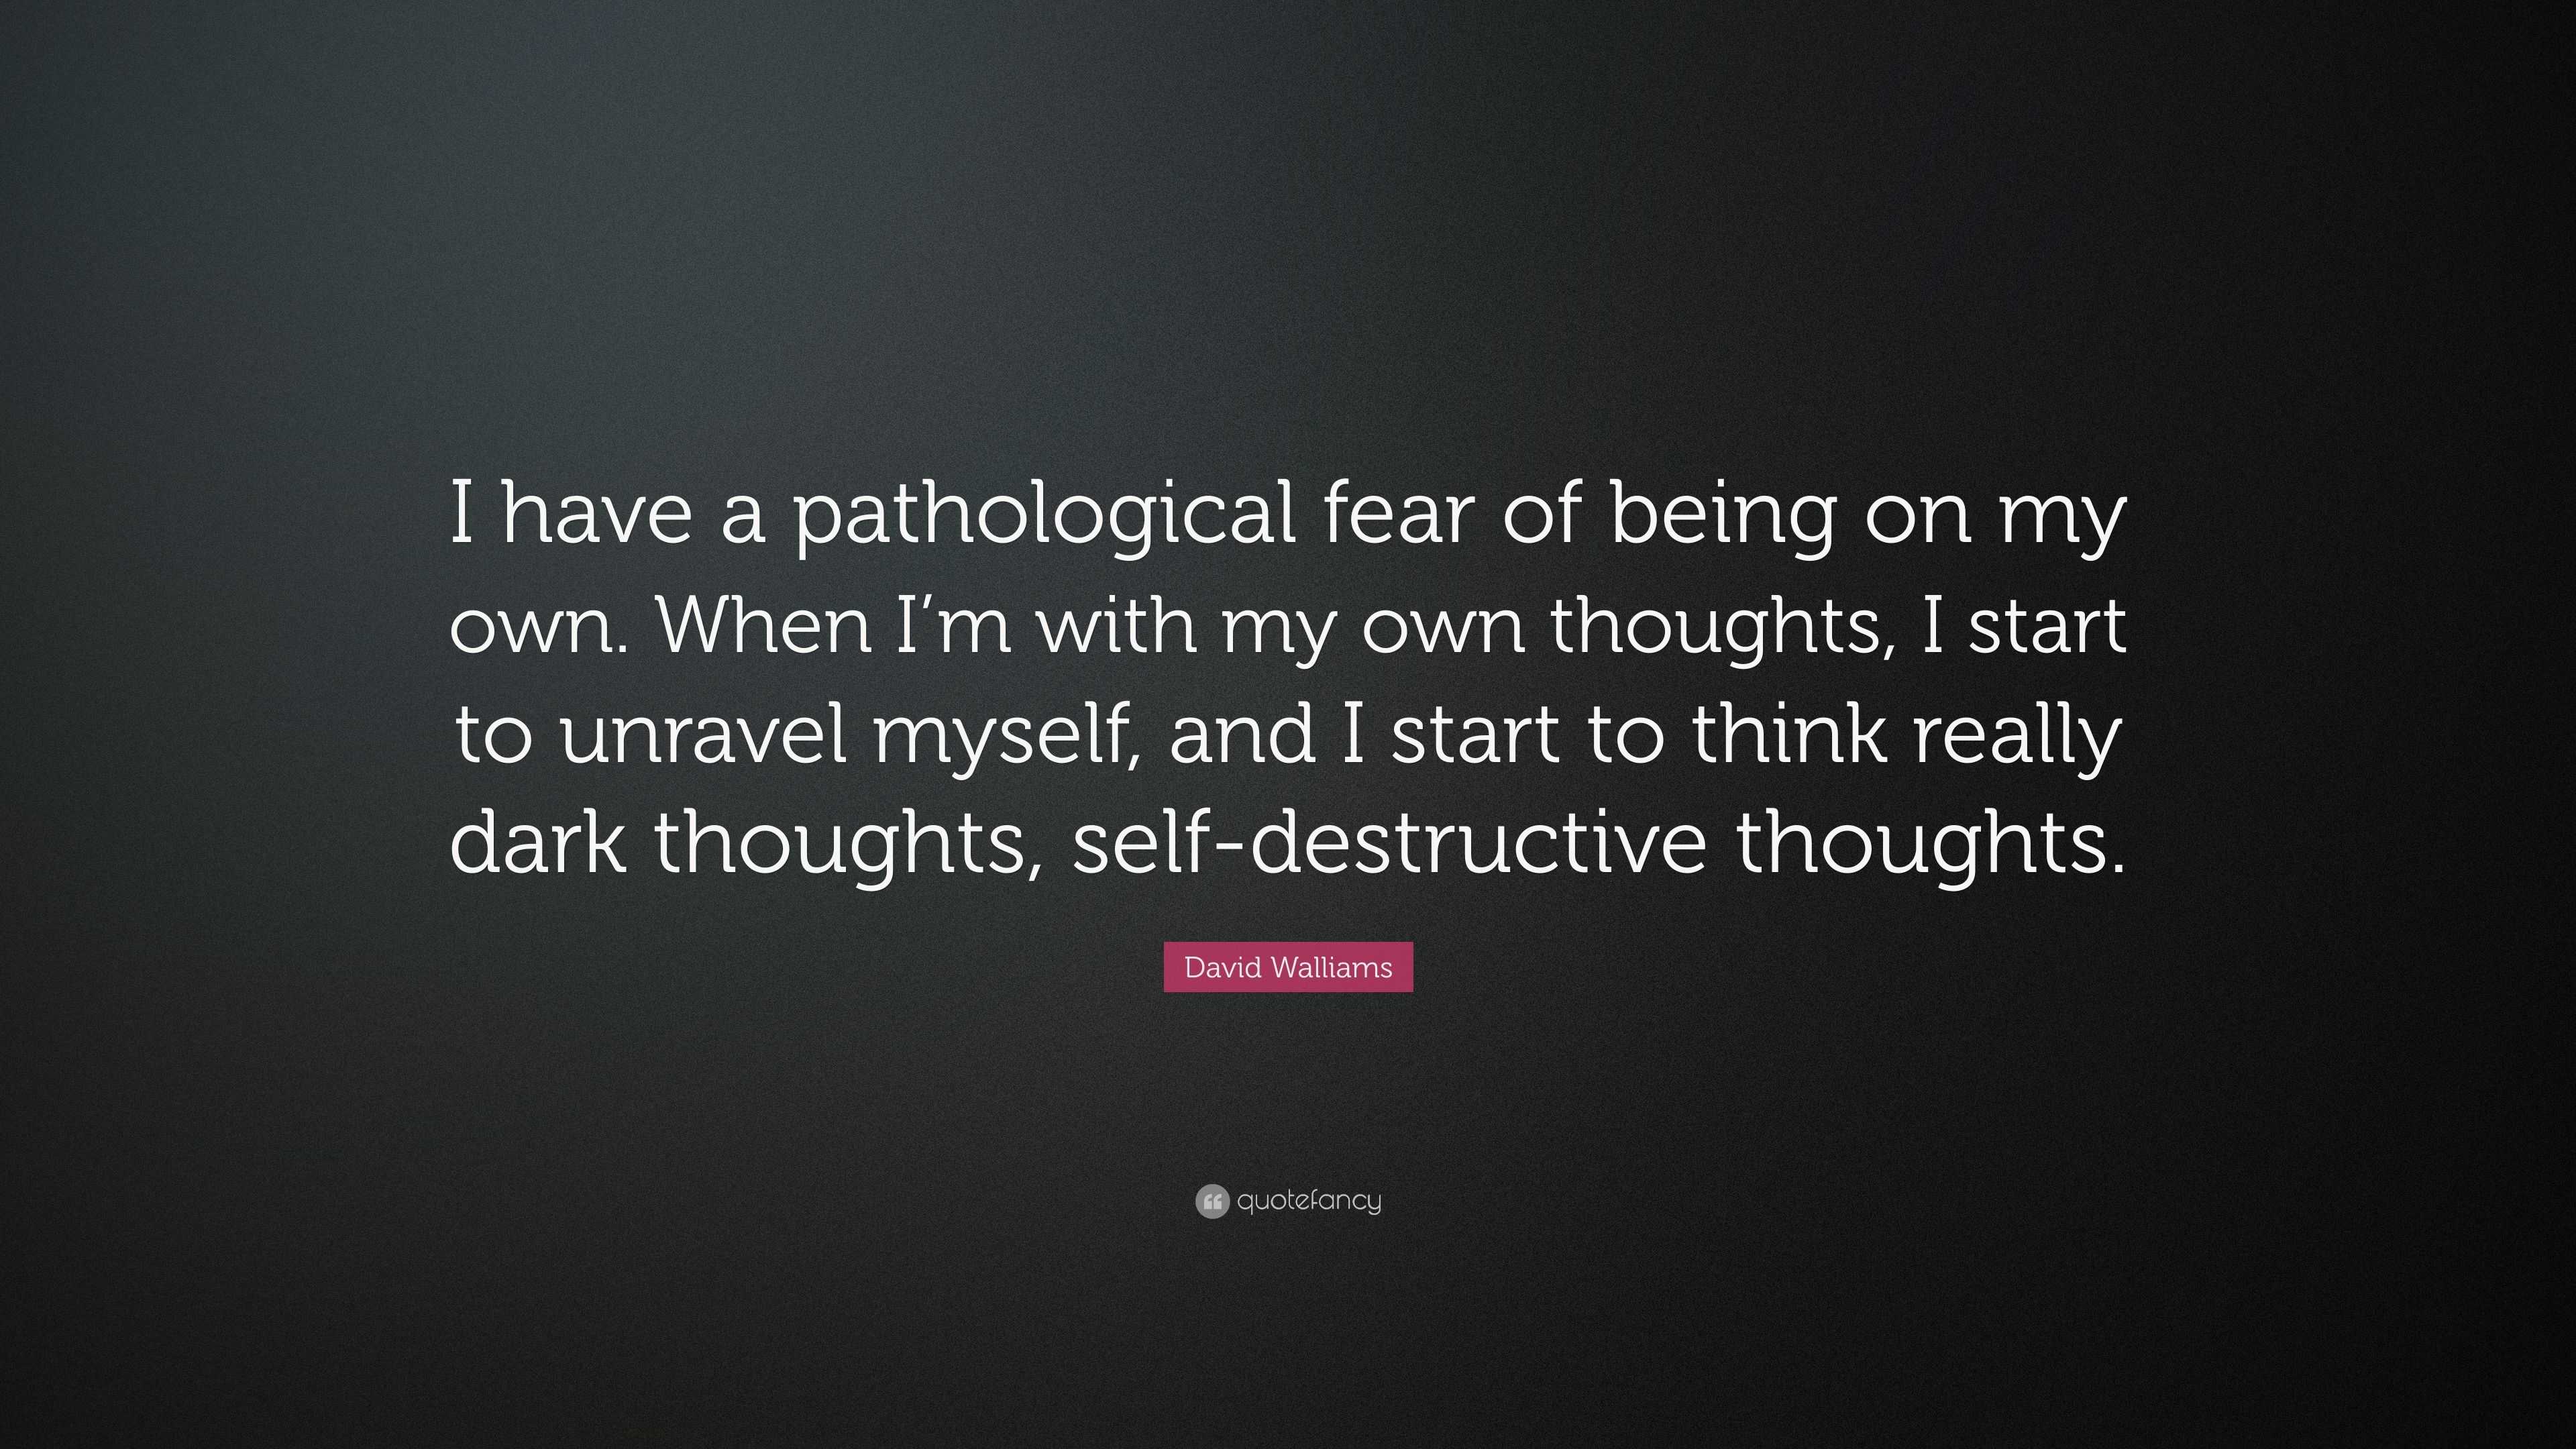 the definition of pathological fear